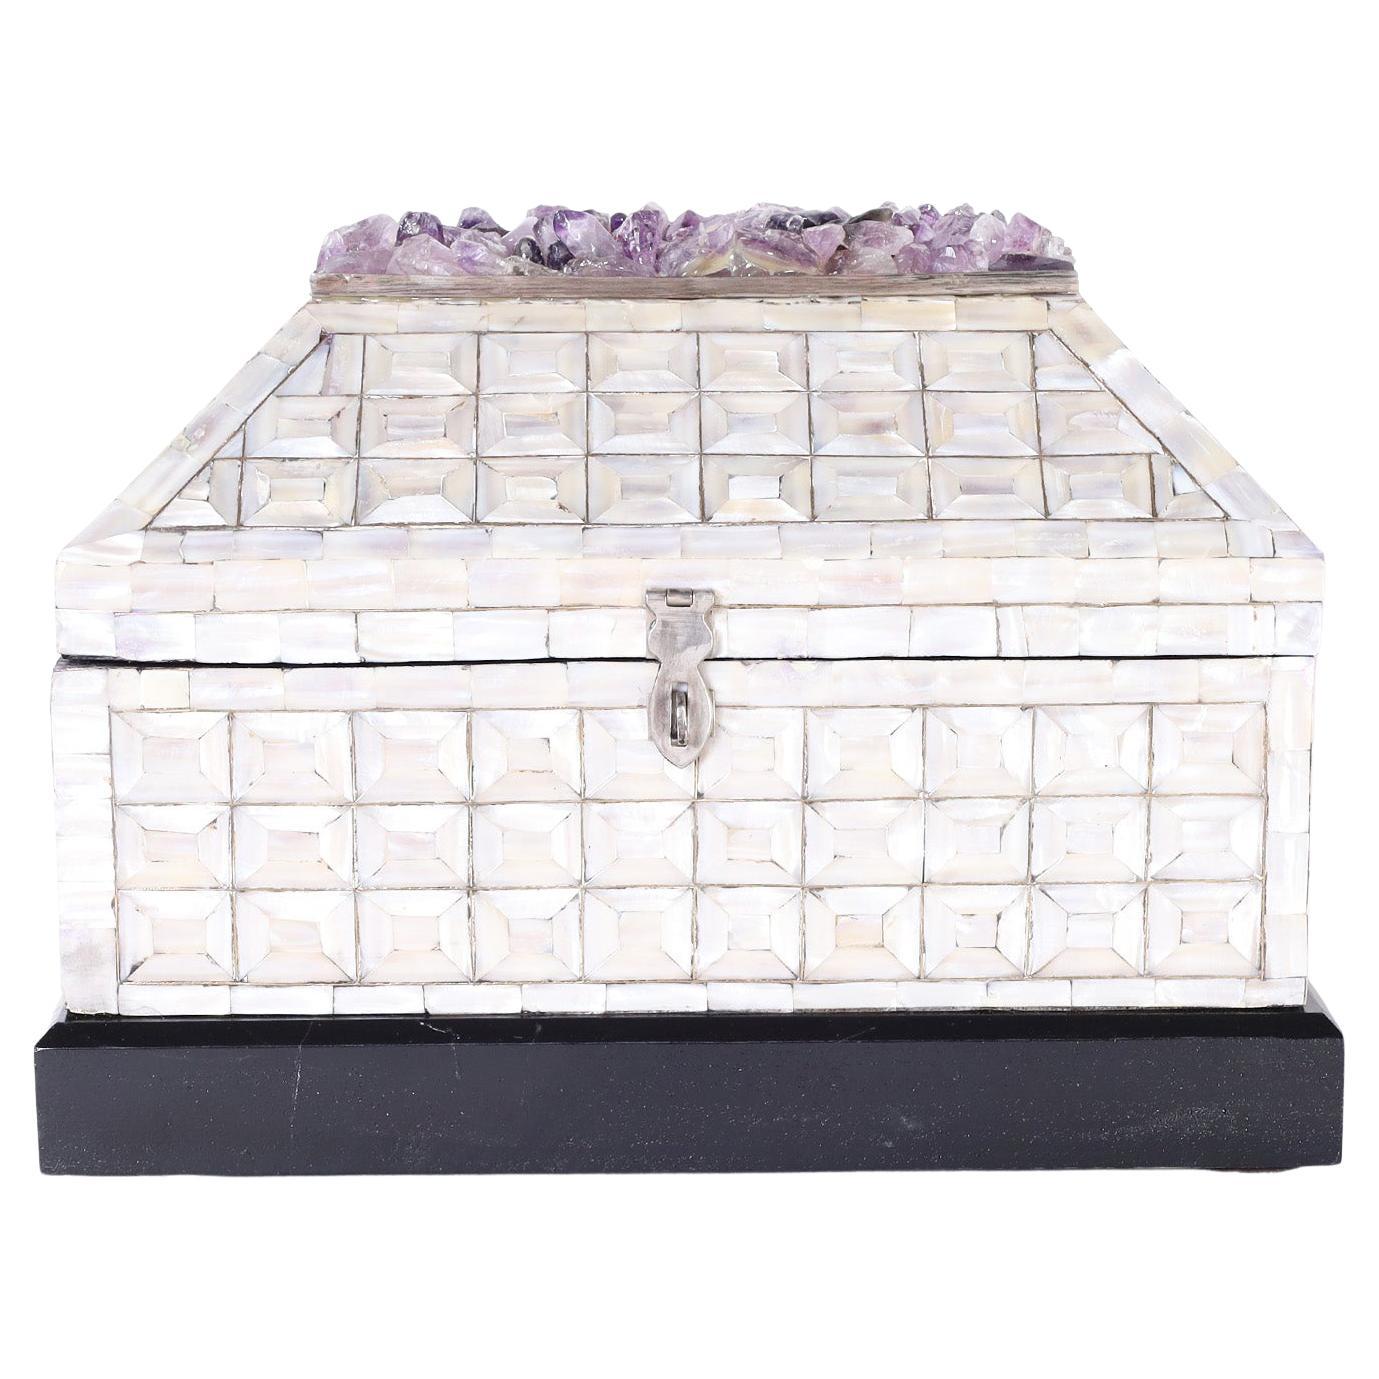 Anglo Indian style hinged box ambitiously covered in a mother of pearl geometric mosaic and featuring a fixed cluster of amethyst stones on top. Stamped 